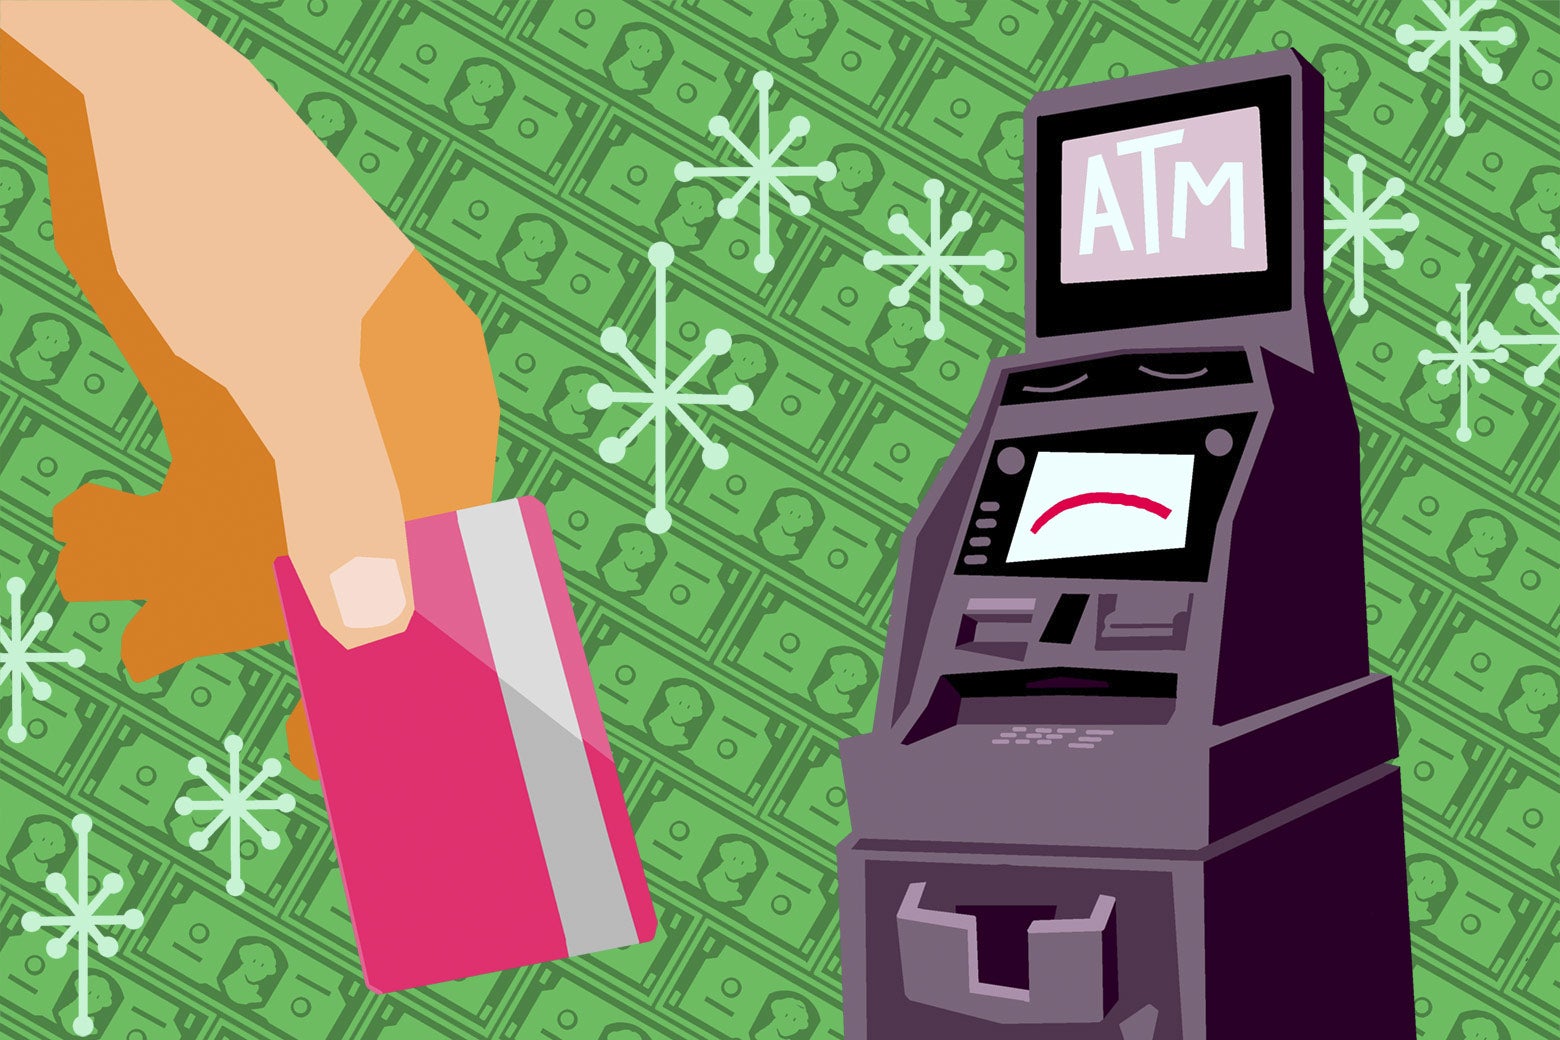 Illustration of a hand holding a pink credit or debit card with an ATM in the background. The background is money.